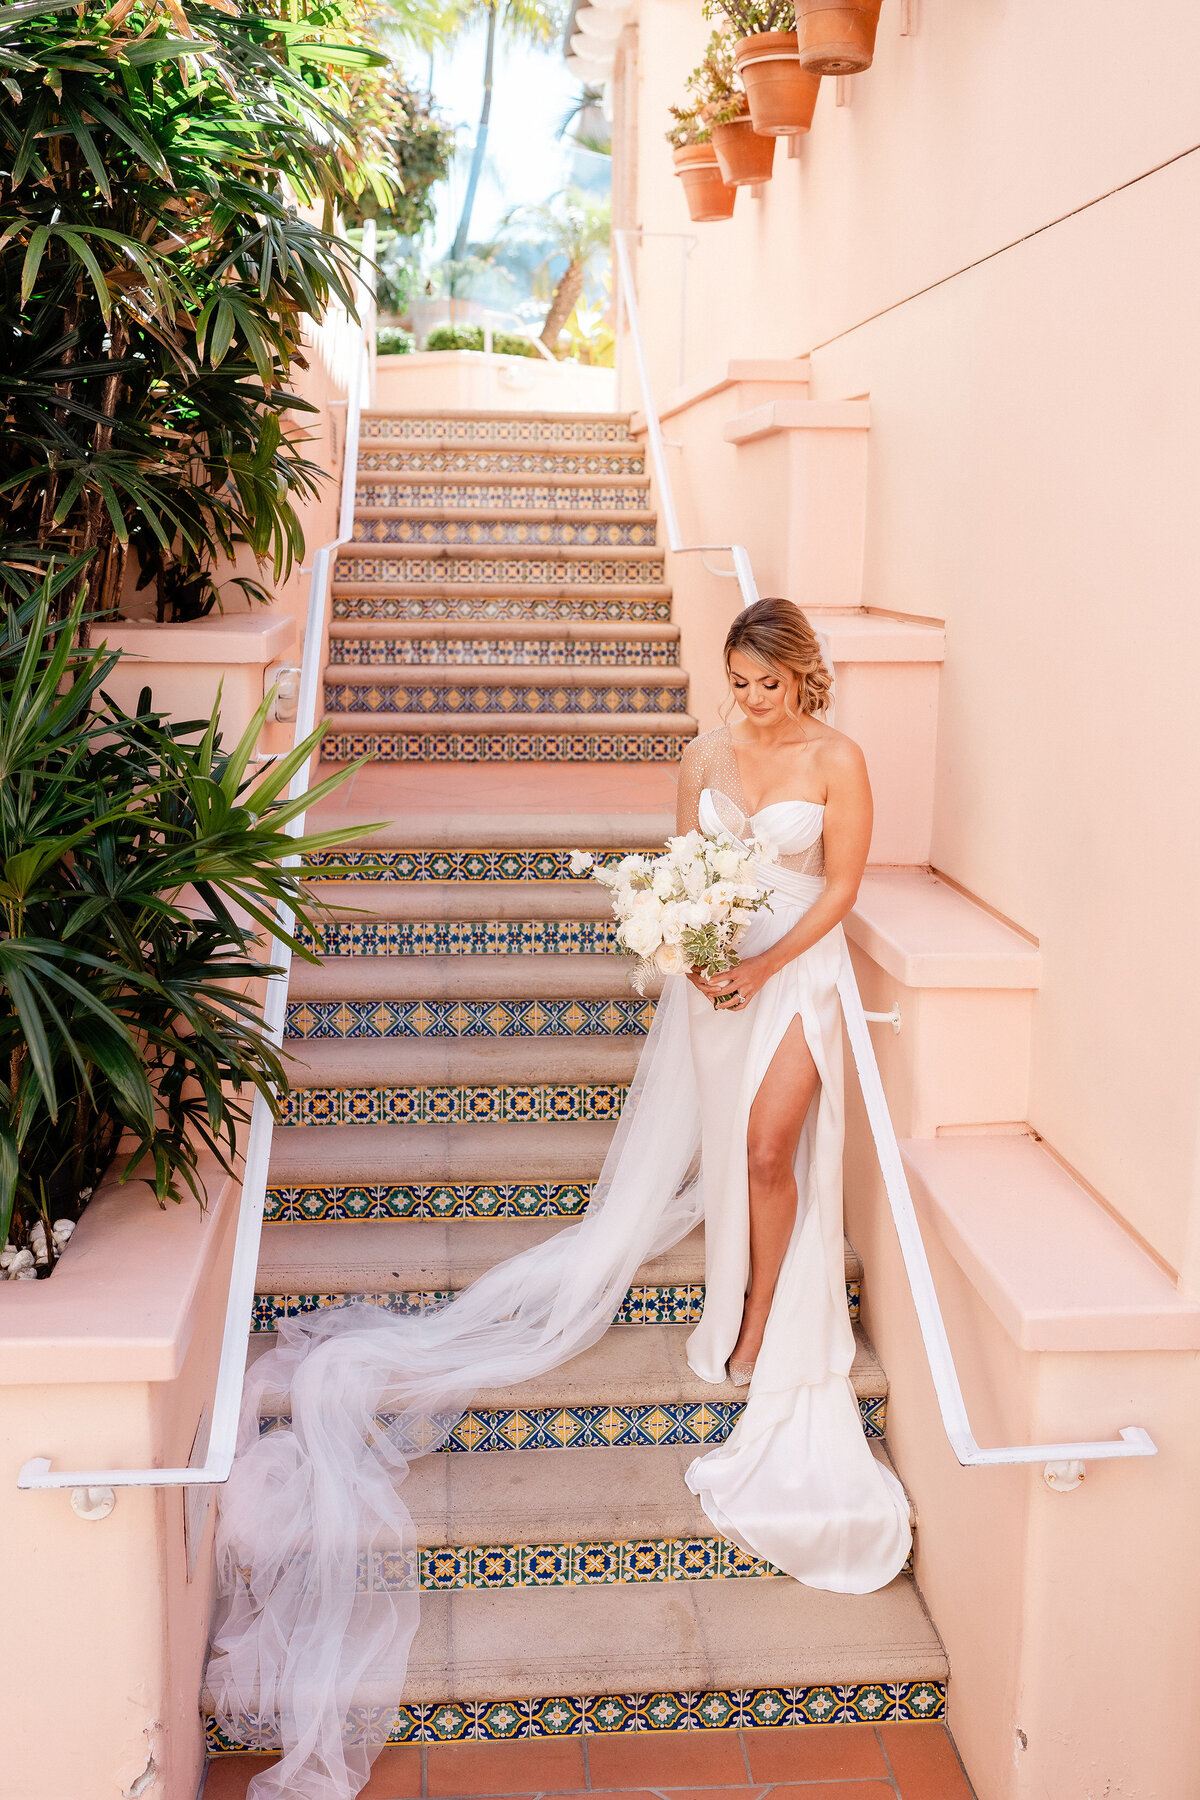 Beautiful old Hollywood style meets Spanish details.  The bride is standing on the stairs looking at her white bouquet against the spanish tiles.